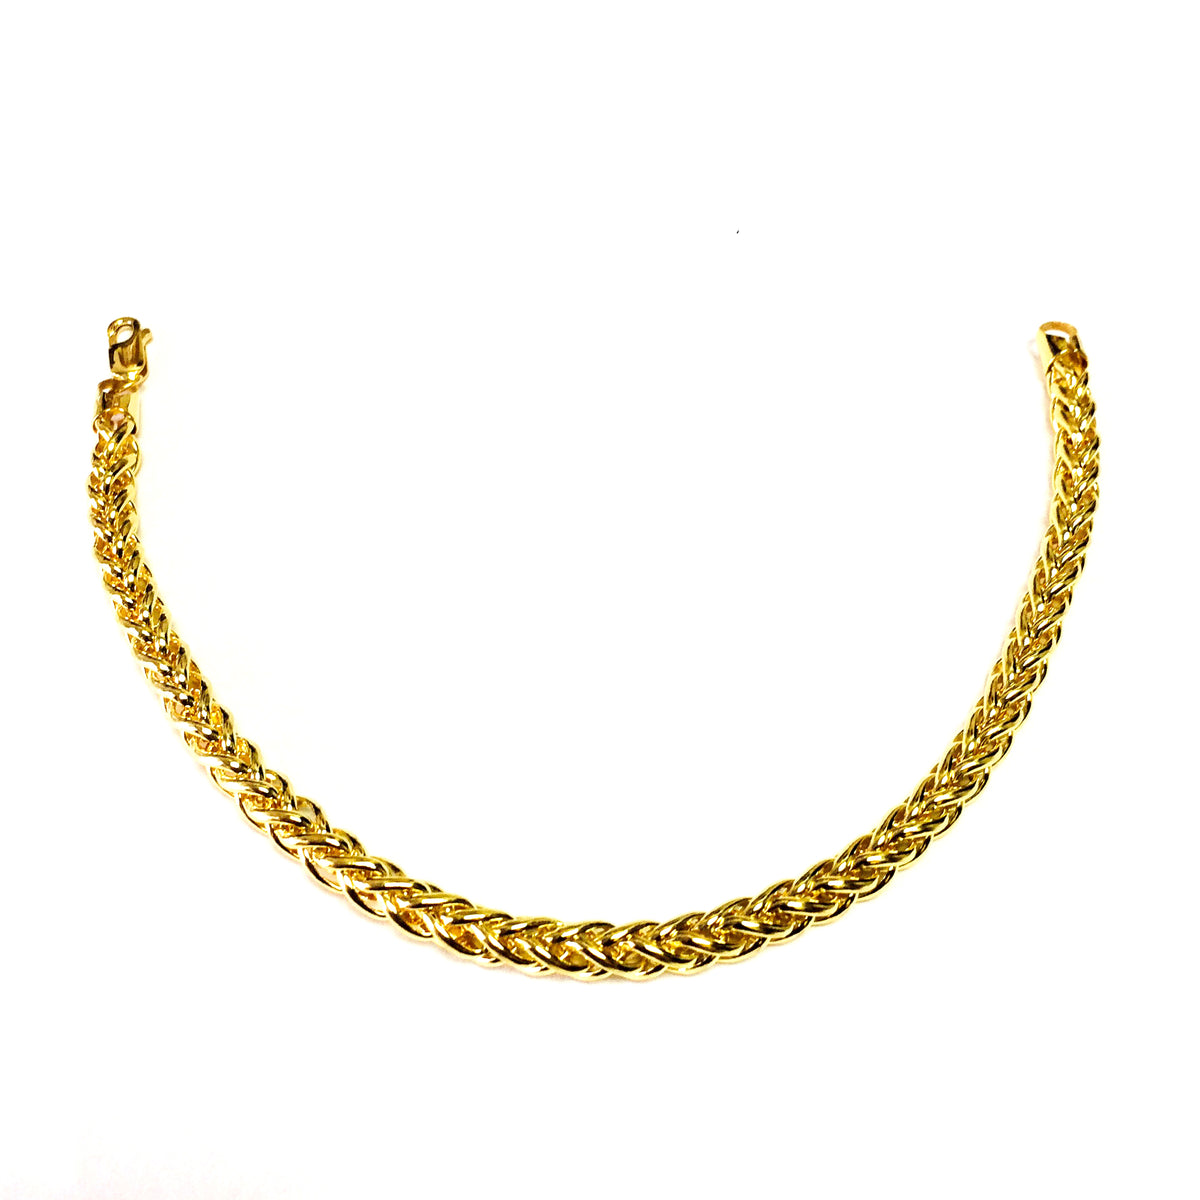 14K Yellow Gold Filled Round Franco Chain Bracelet, 6.0mm, 8.5" fine designer jewelry for men and women